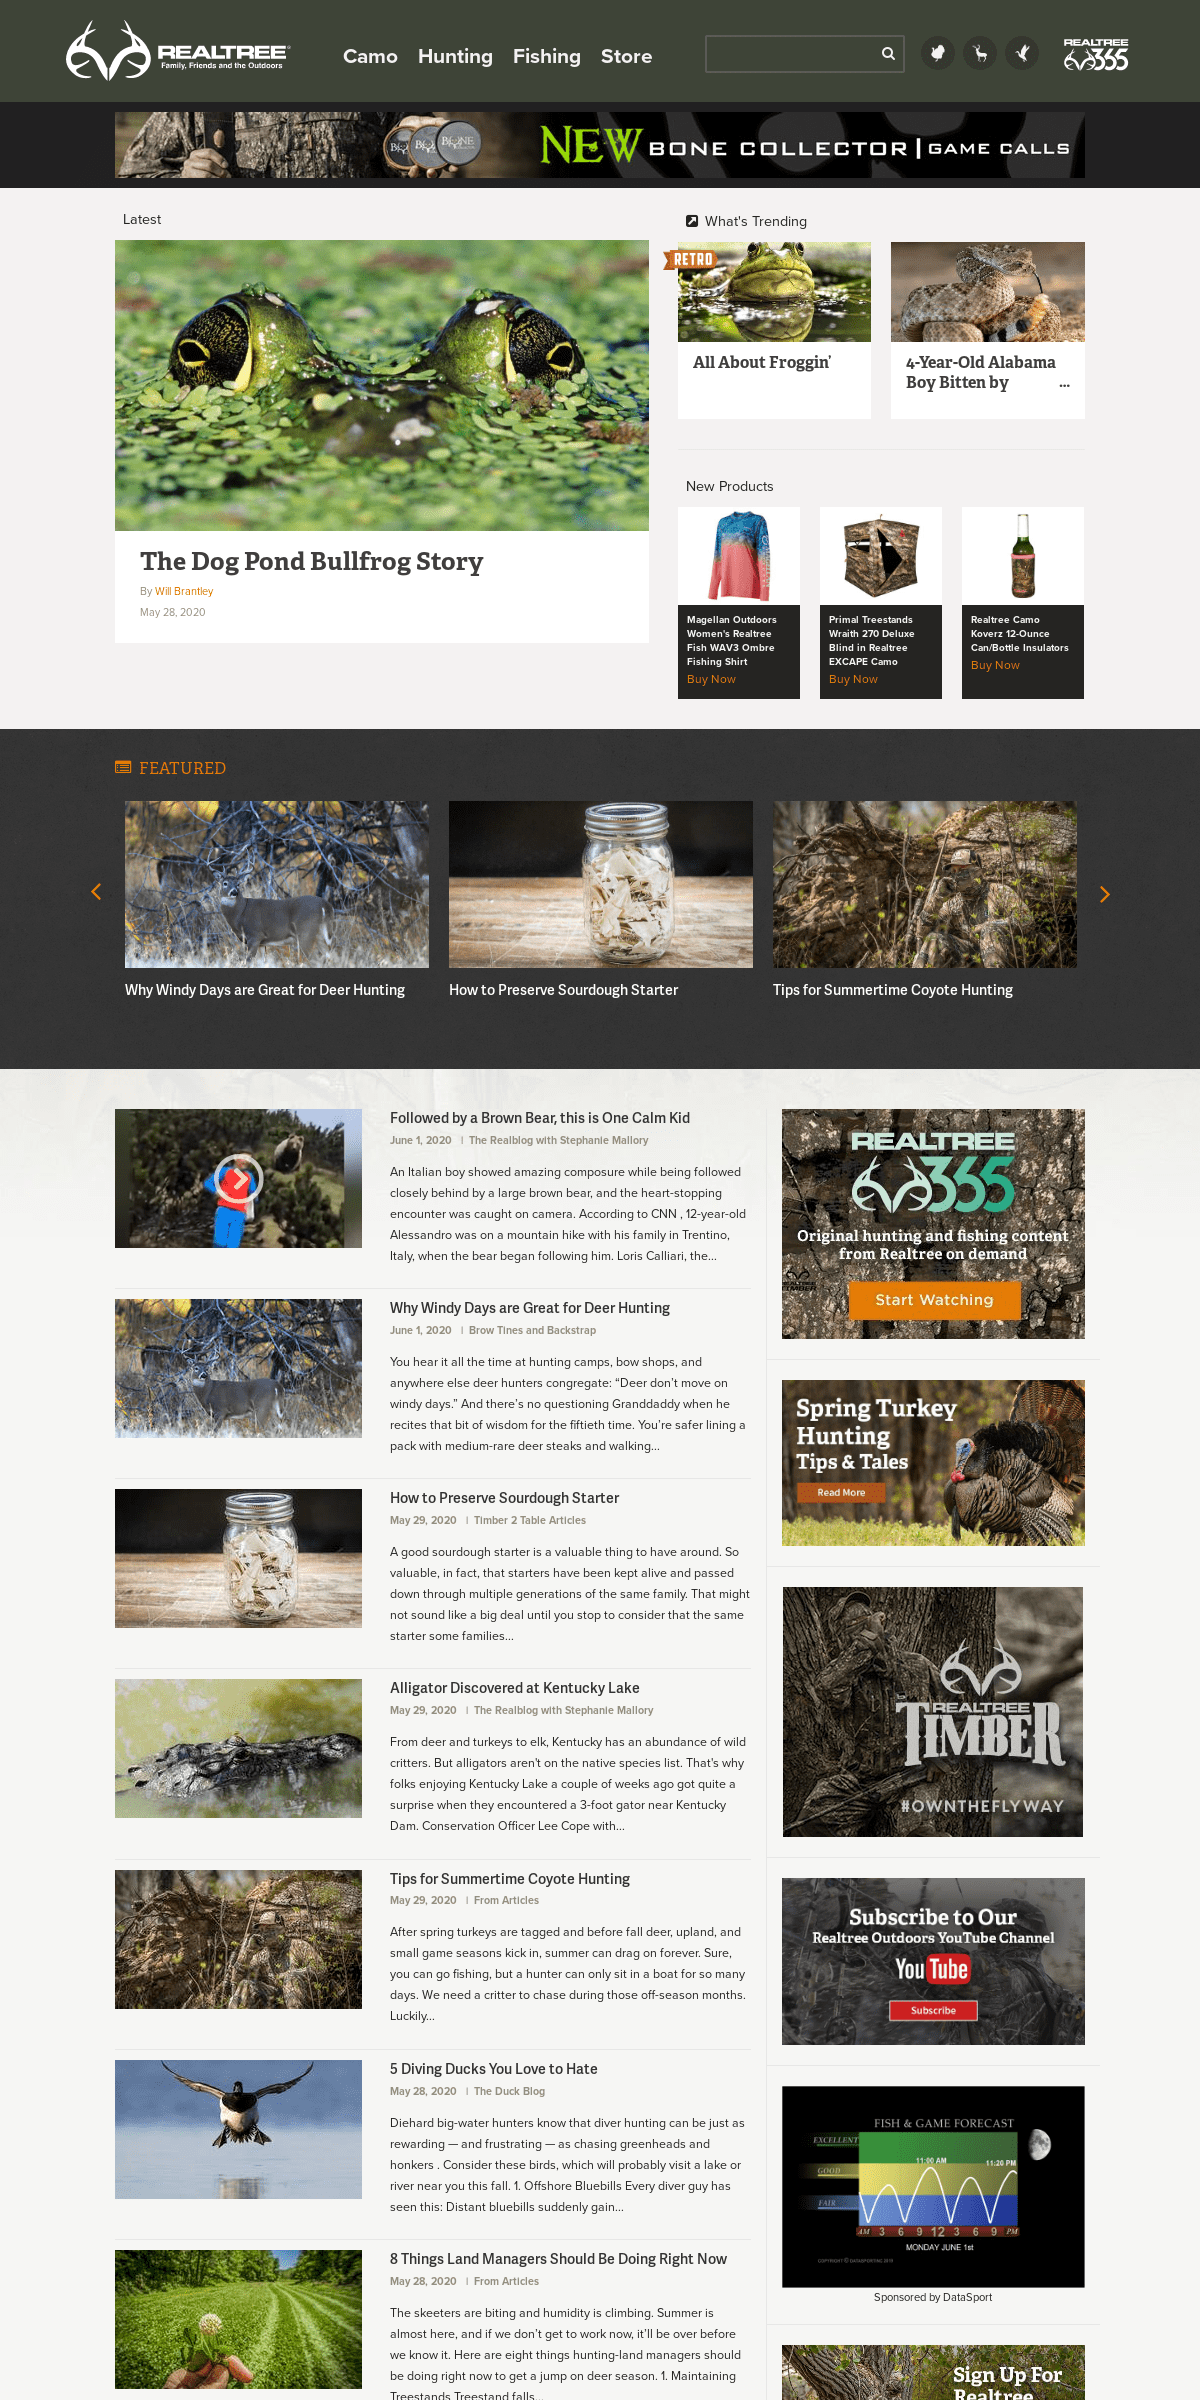 A complete backup of realtree.com